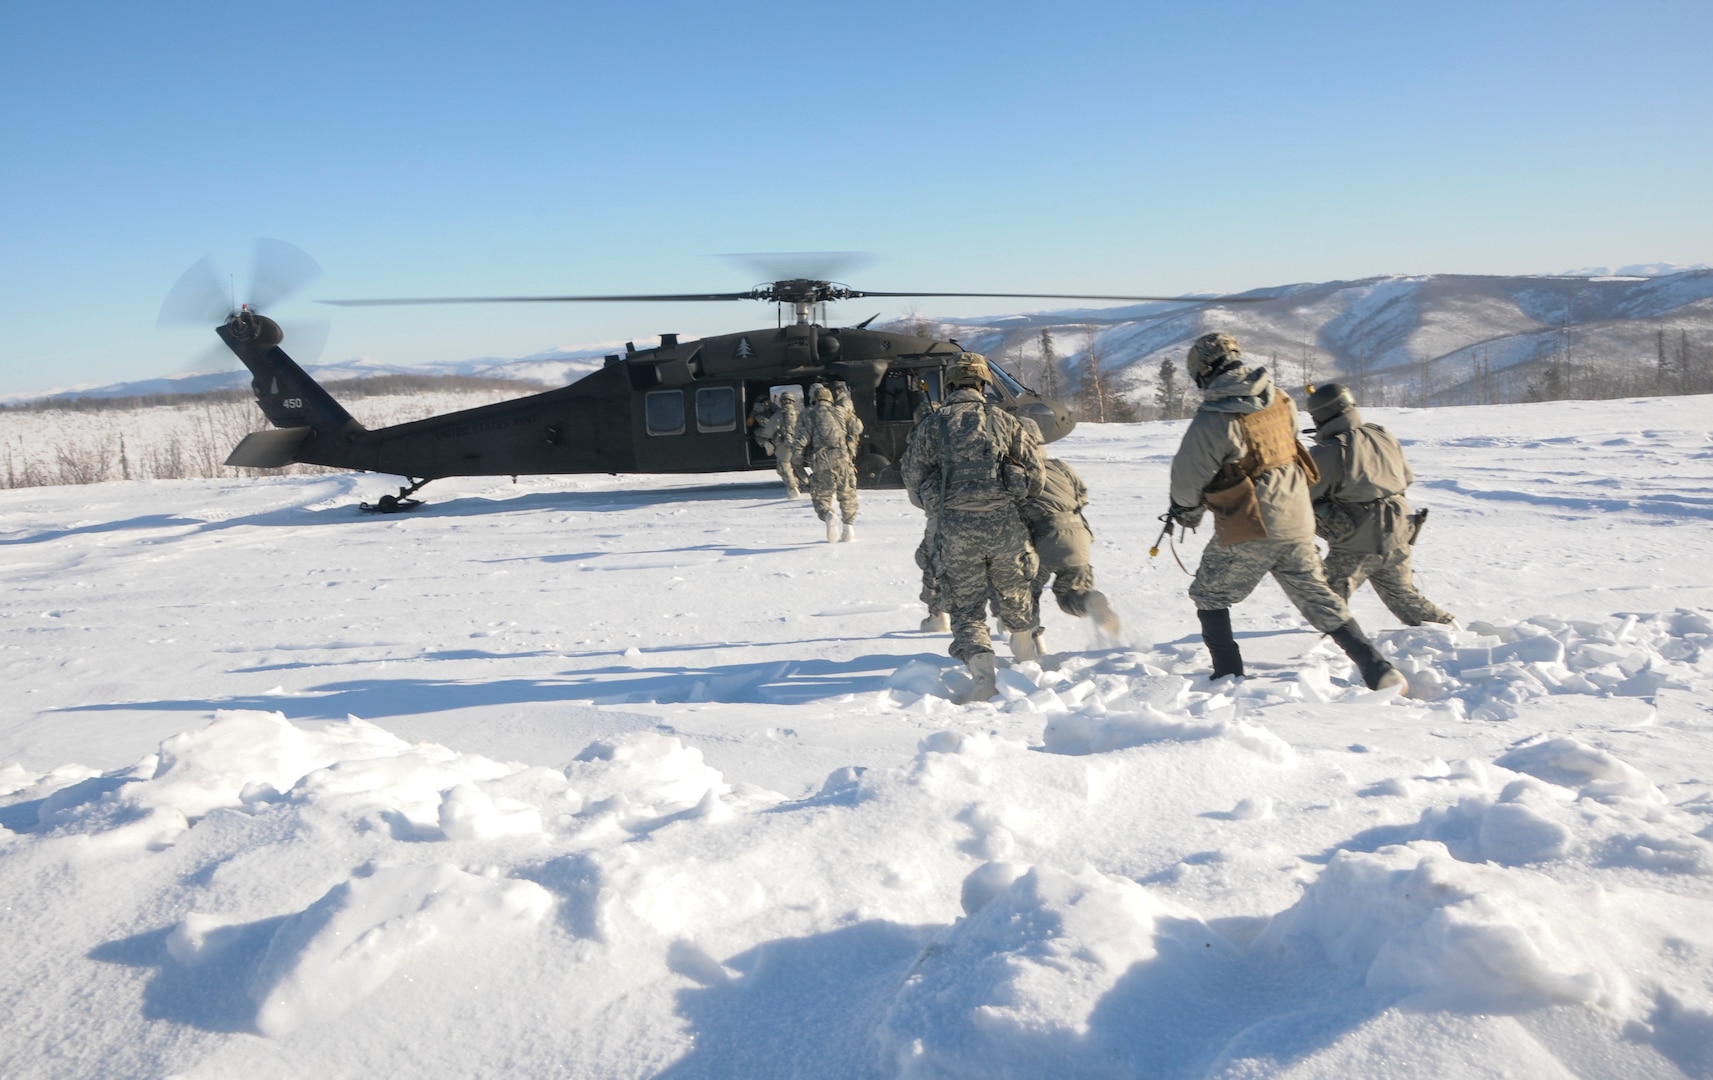 Members of 1st Battalion, 297th Infantry Regiment, Alaska National Guard, based in Fairbanks, Alaska, board a UH-60 Black Hawk helicopter operated by members of 1st Battalion, 169th Aviation Regiment of the New Hampshire National Guard Feb. 28, 2020, in the Yukon Training Area on Eielson Air Force Base as part of exercise Arctic Eagle 2020.